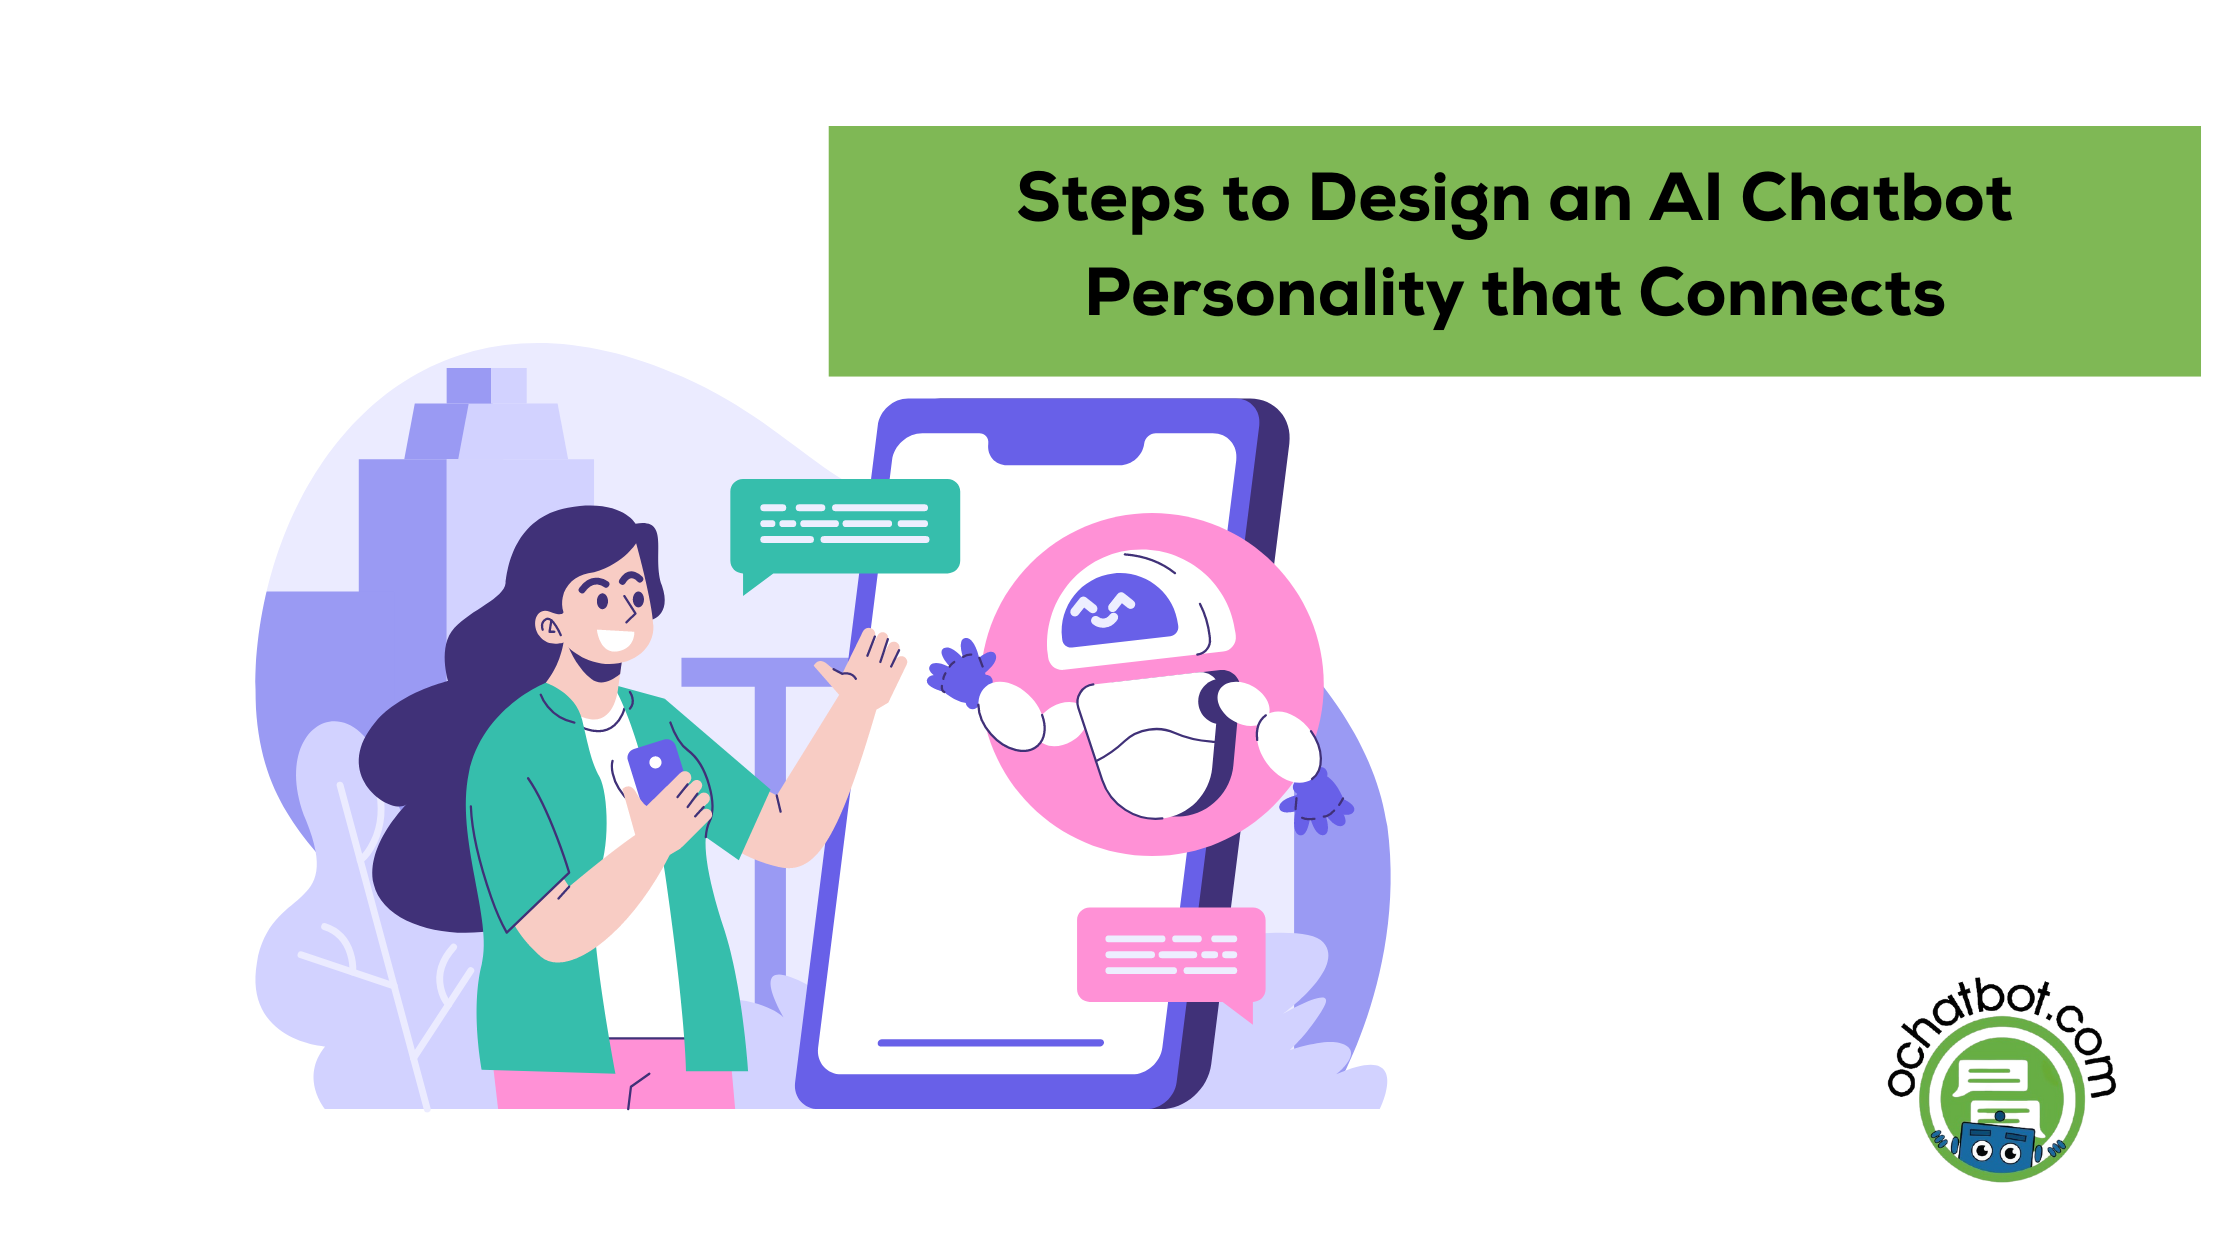 Steps to Design an AI Chatbot Personality that Connects